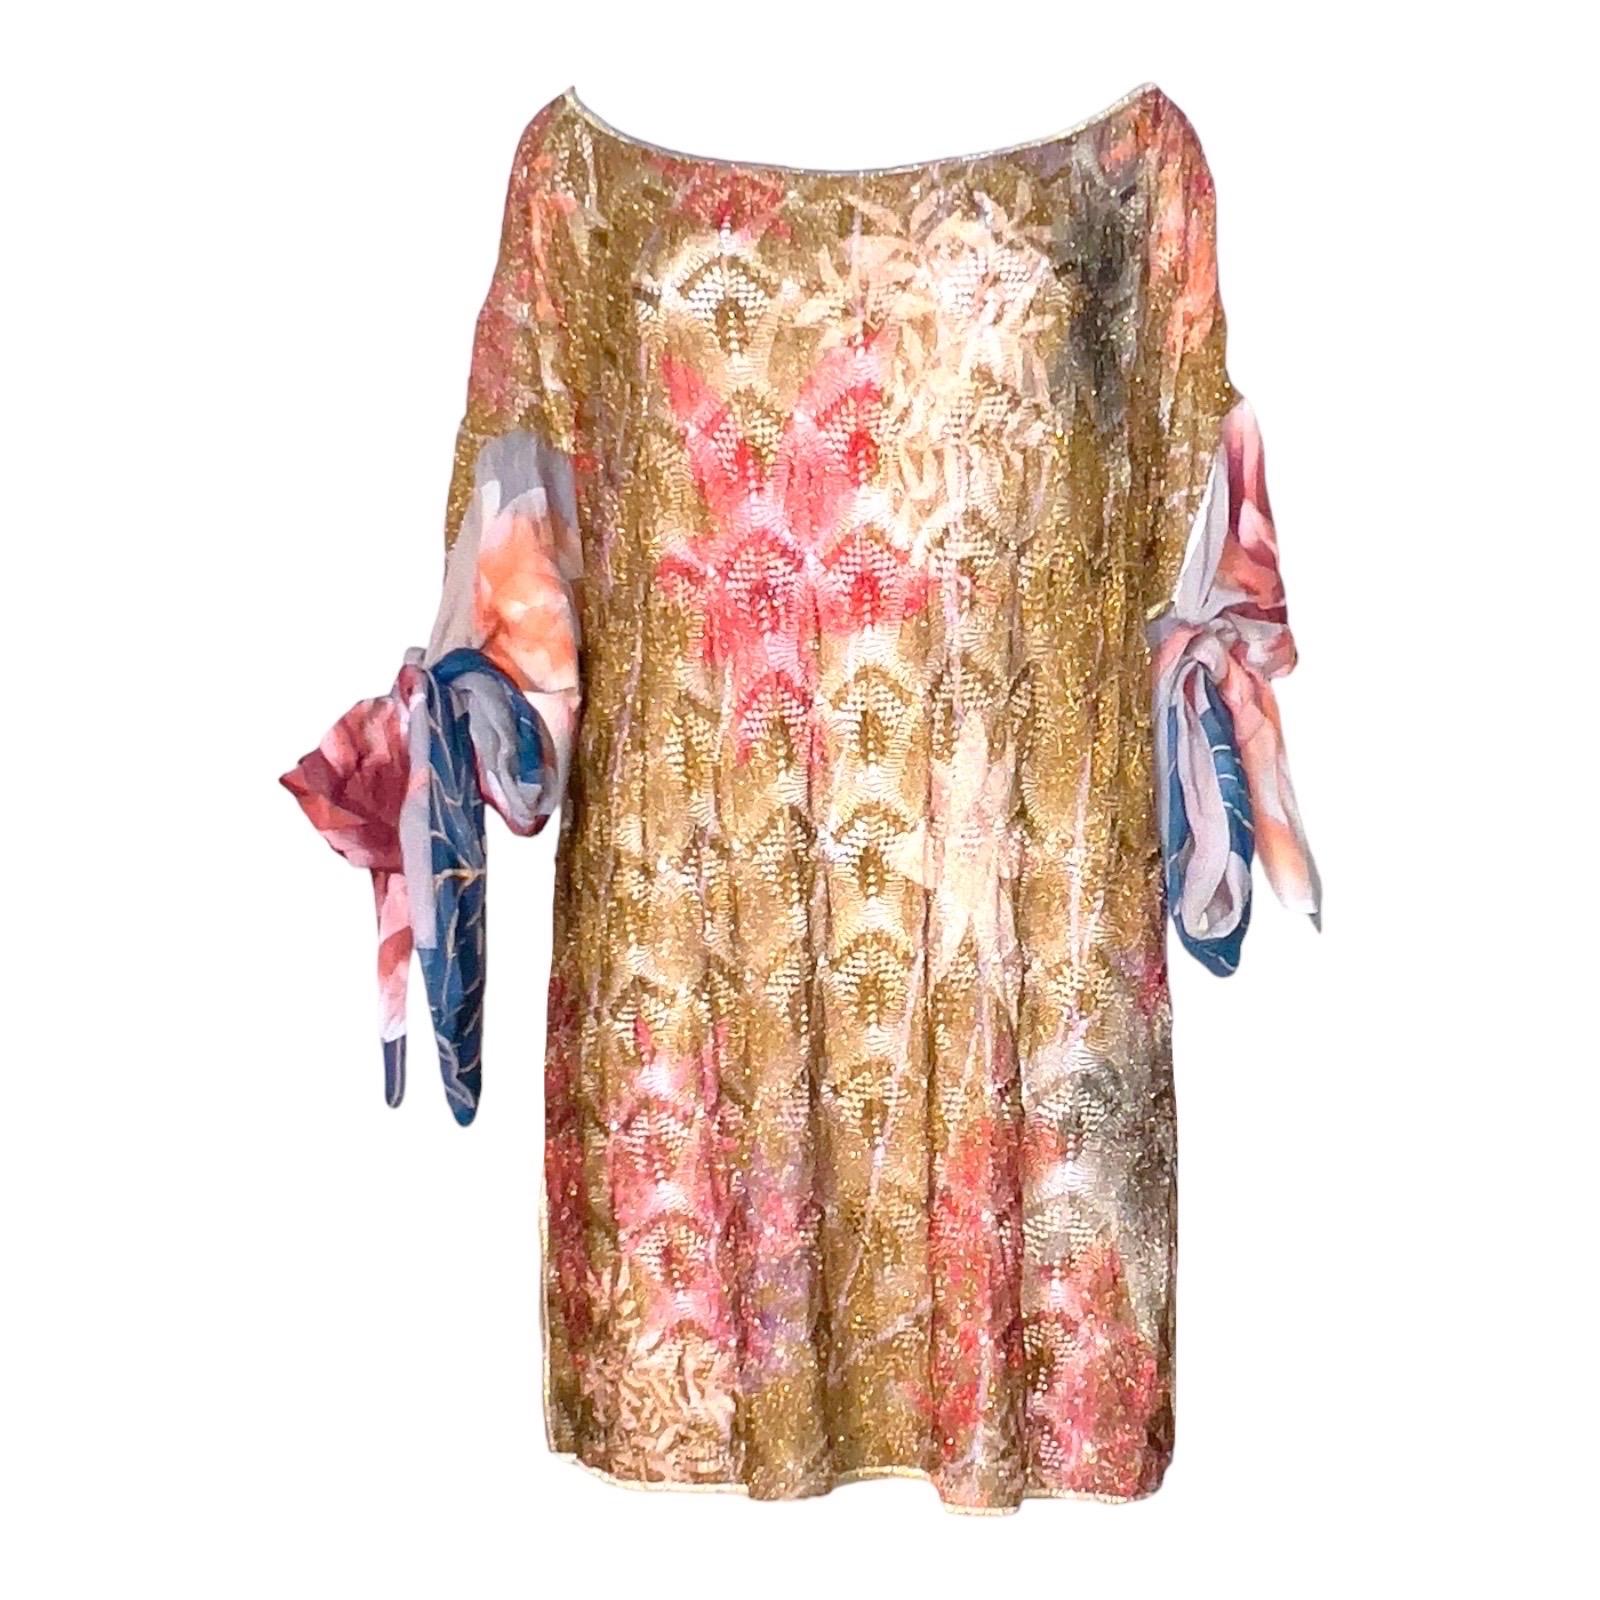 UNWORN Missoni Gold Metallic Crochet Knit Floral Kaftan Tunic Dress Cover Up M In Excellent Condition For Sale In Switzerland, CH